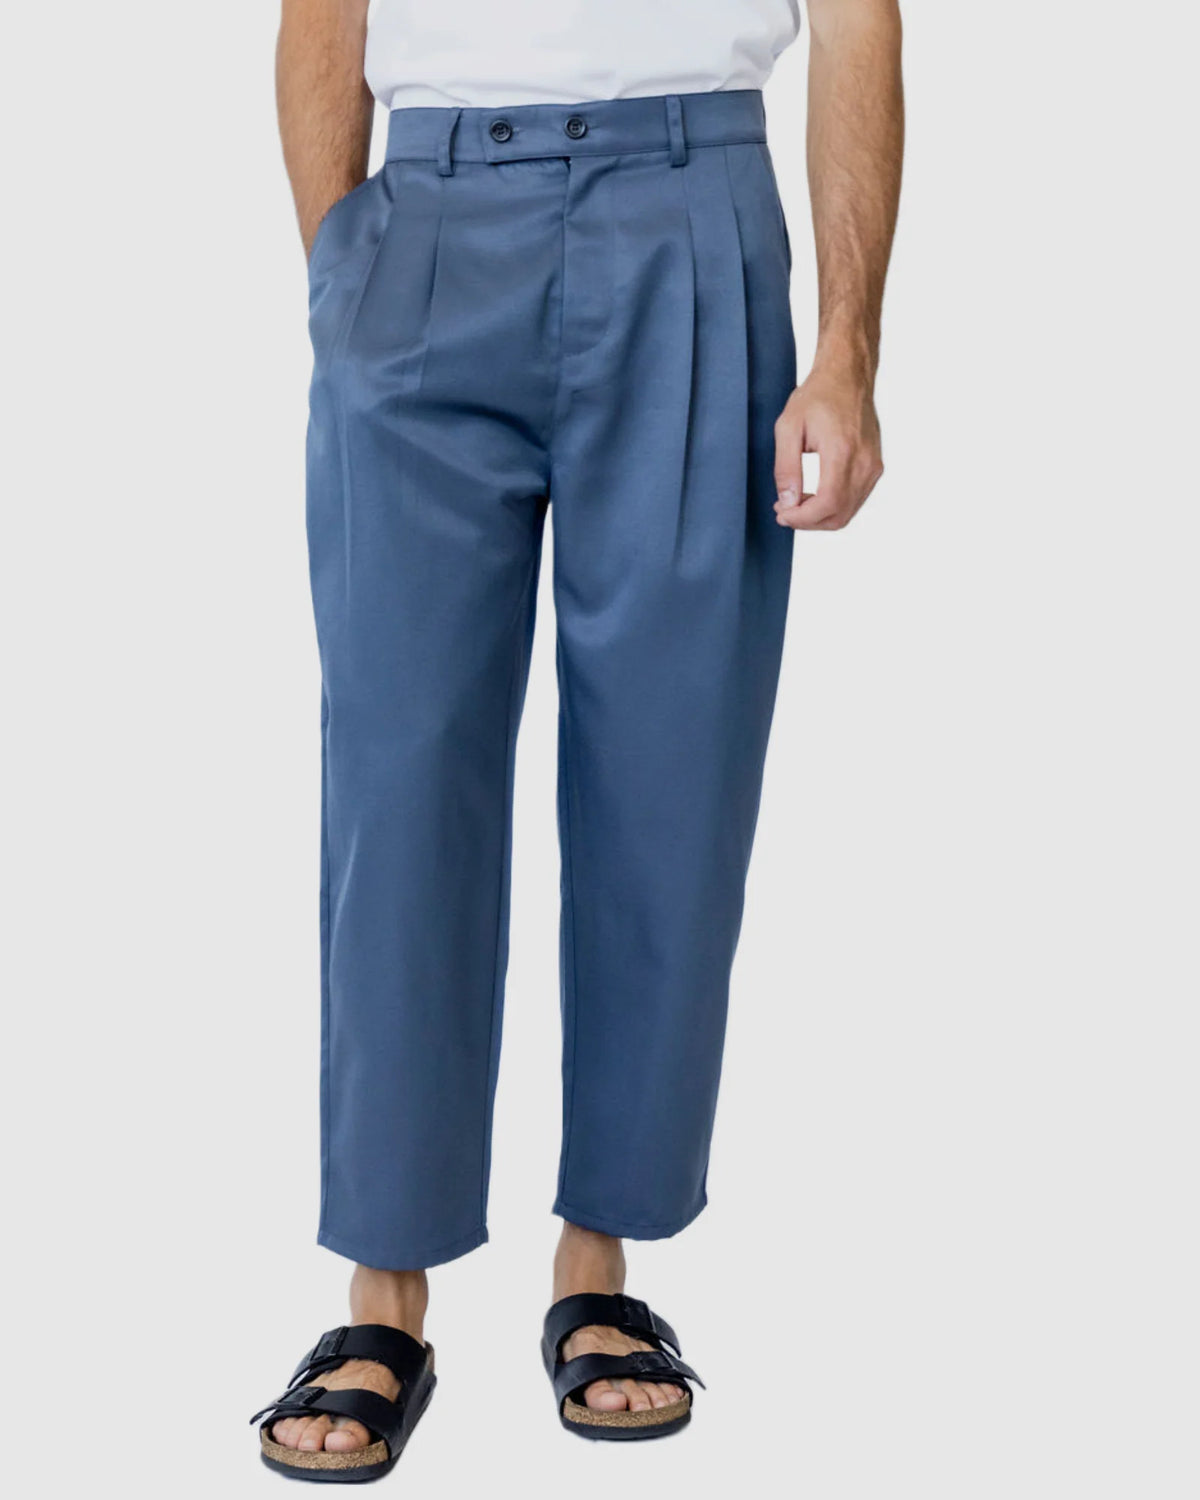 Justin Cassin Mooney Button Cropped Pants in Blue Color